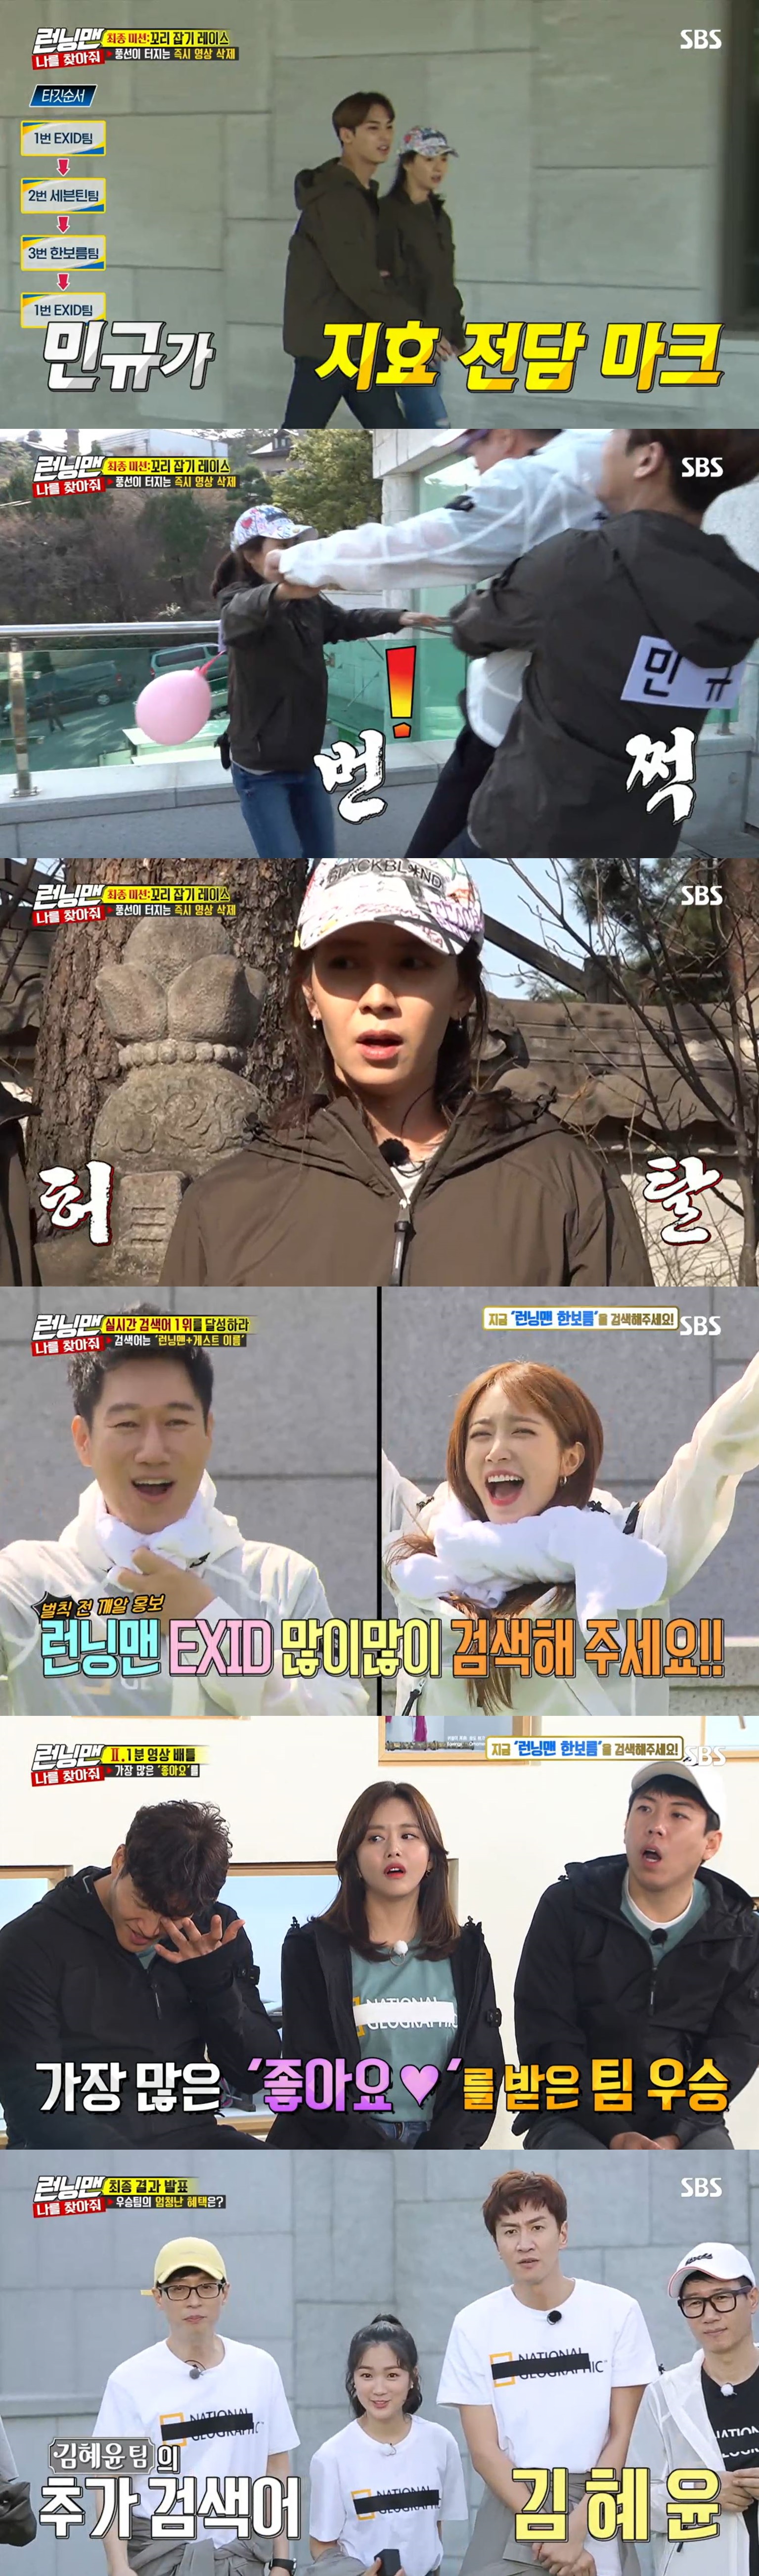 Seventeen Mingyu and Ace Song Ji-hyo became the main characters of Running Man and Best 1 minute.According to Nielsen Korea, the ratings agency, SBS Running Man, which was broadcast on the 21st, soared to 7.1% of the highest ratings per minute (based on the audience rating of households in the metropolitan area), and 2049 target ratings, an important indicator of major advertising officials, ranked first in the same time zone with 4% (based on two viewer ratings).On this day, Seventeens victory and Mingyu, EXIDs Hani and Solji, actor Kim Hye-yoon, and actor Han Bo-reum appeared as guests and played the first real-time search word war.Seventeen teamed up with Song Ji-hyo and Jeon So-min, Kim Hye-yoon teamed up with Yoo Jae-Suk and Kwangsoo, and Han Bo-reum teamed up with Kim Jong-kook and Yang Se-chan.EXID was in a boat with Ji Suk-jin and Haha; they had to go through three rounds in total to achieve the top spot in real-time search terms before starting the game that won.The first round was the number one chart of those days. The last team was baptized with water bombs, with the number one game on the popular song chart from 1993 to 2018.Kim Hye-yoon went on a quiz with his dance skills hidden to avoid water bombs.However, Yoo Jae-Suk and Kwangsoo laughed at Kim Hye-yoon, saying, I should not have told you if I could not, and I thought I was doing well.At the end of the battle, the Han Bo-reum team became the winner of the chart of those days and benefited from the Running Man Han Bo-reum phrase at the top of the screen.The second team was the Seventeen team, the third team was the Kim Hye-yoon team, and the water cannon penalty went to the last EXID team.The second round was a battle in which the team that produced a one-minute promotional video for each team won the most likes on the Running Man official SNS.Kim Hye-yoons team has featured a variety of elements that attract the attention of netizens, from Jennys Solo choreography to the performance of the example in Skycastle.The EXID team produced direct-cam videos featuring choreography and anti-war fun tailored to Hot Pink, and the Seventeen team challenged the Onana dance.The Han Bo-reum team used Kim Jong-kooks golden connections to capture the instant phone connections with the best stars from Jackson to Ryu Hyun-jin of GOT7.Finally, the tail-catching race started when the promotional video was deleted, and the promotional video posted on the SNS was deleted as soon as the balloon of the tail bursts, and the number of likes will be finished.Kim Hye-yoons team was the first to be eliminated by the Han Bo-reum team after the balloon was removed.Song Ji-hyo, left alone, was in Danger where the balloon would burst with the appearance of Ji Suk-jin, but with the help of Seventeen Mingyu, he escaped Danger.However, Haha joined the team and went to catch Song Ji-hyo, and the two teams played front.Mingyu defended Song Ji-hyo by blocking Ji Suk-jin and Haha, but Song Ji-hyos balloon was caught in the branches and was dropped.The scene recorded the highest audience rating of 7.1% per minute, accounting for the best one minute.The final winner of the tail-catching race was won by the Han Bo-reum team.However, Kim Hye-yoon teams video, which was first deleted due to the first elimination of tail-catching, won the highest number of likes of 23061.The winning Kim Hye-yoon team provided another search word in addition to Running Man Kim Hye-yoon.The final winner will be determined by counting real-time search terms until midnight.